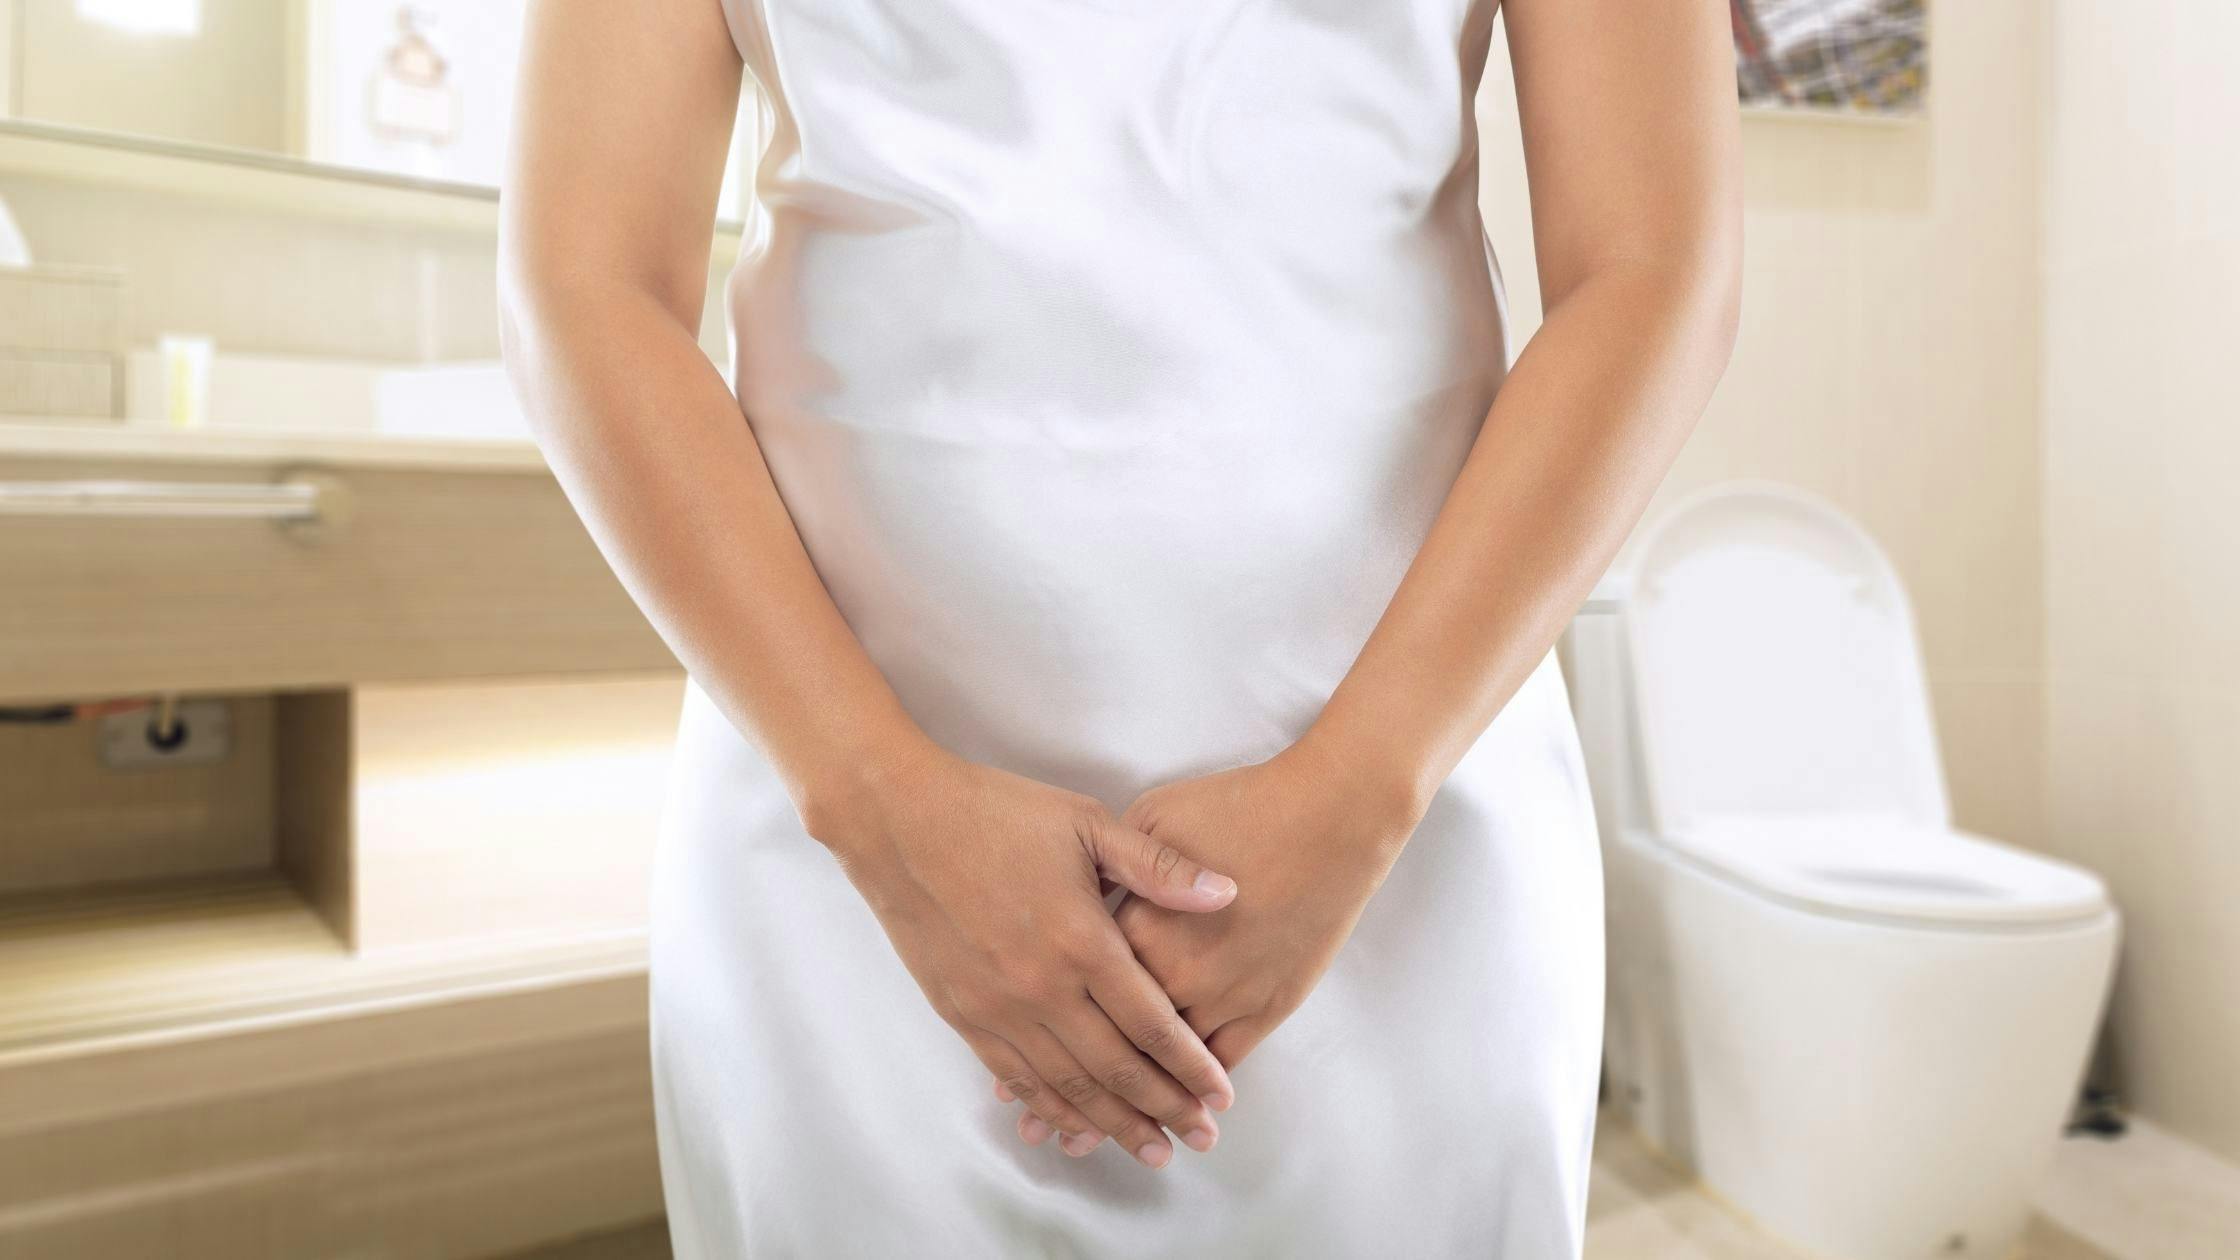 a woman in a white dress is standing in a bathroom with her hands on her stomach .